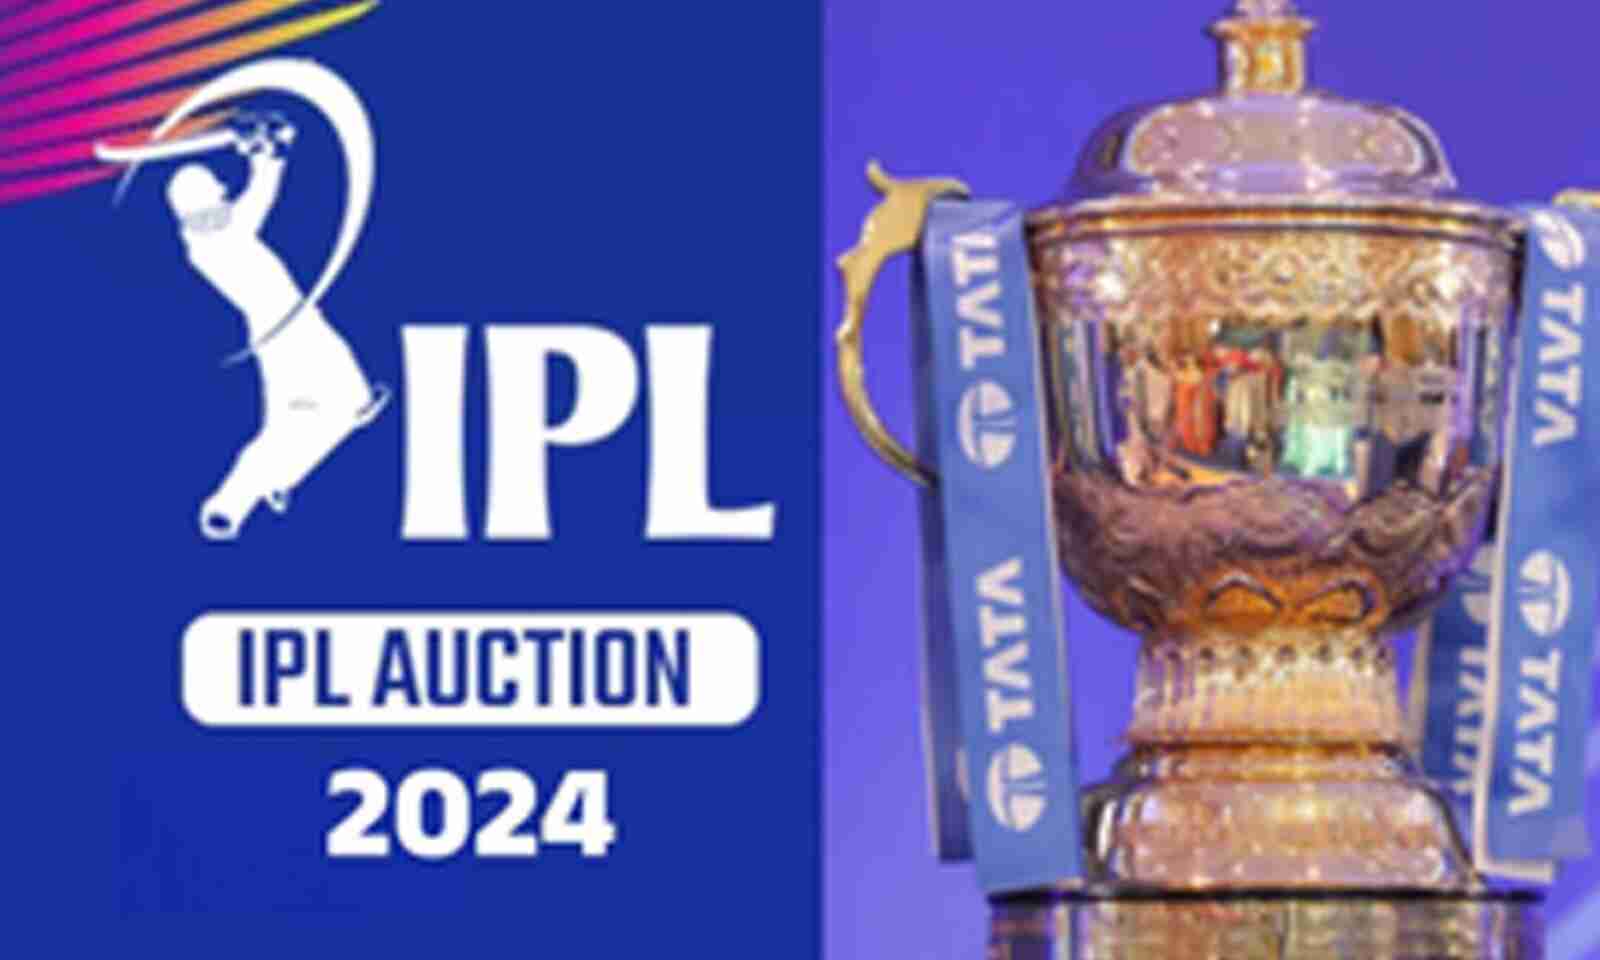 Remaining Purse Value Of All 8 IPL Teams After IPL 2022 Retention